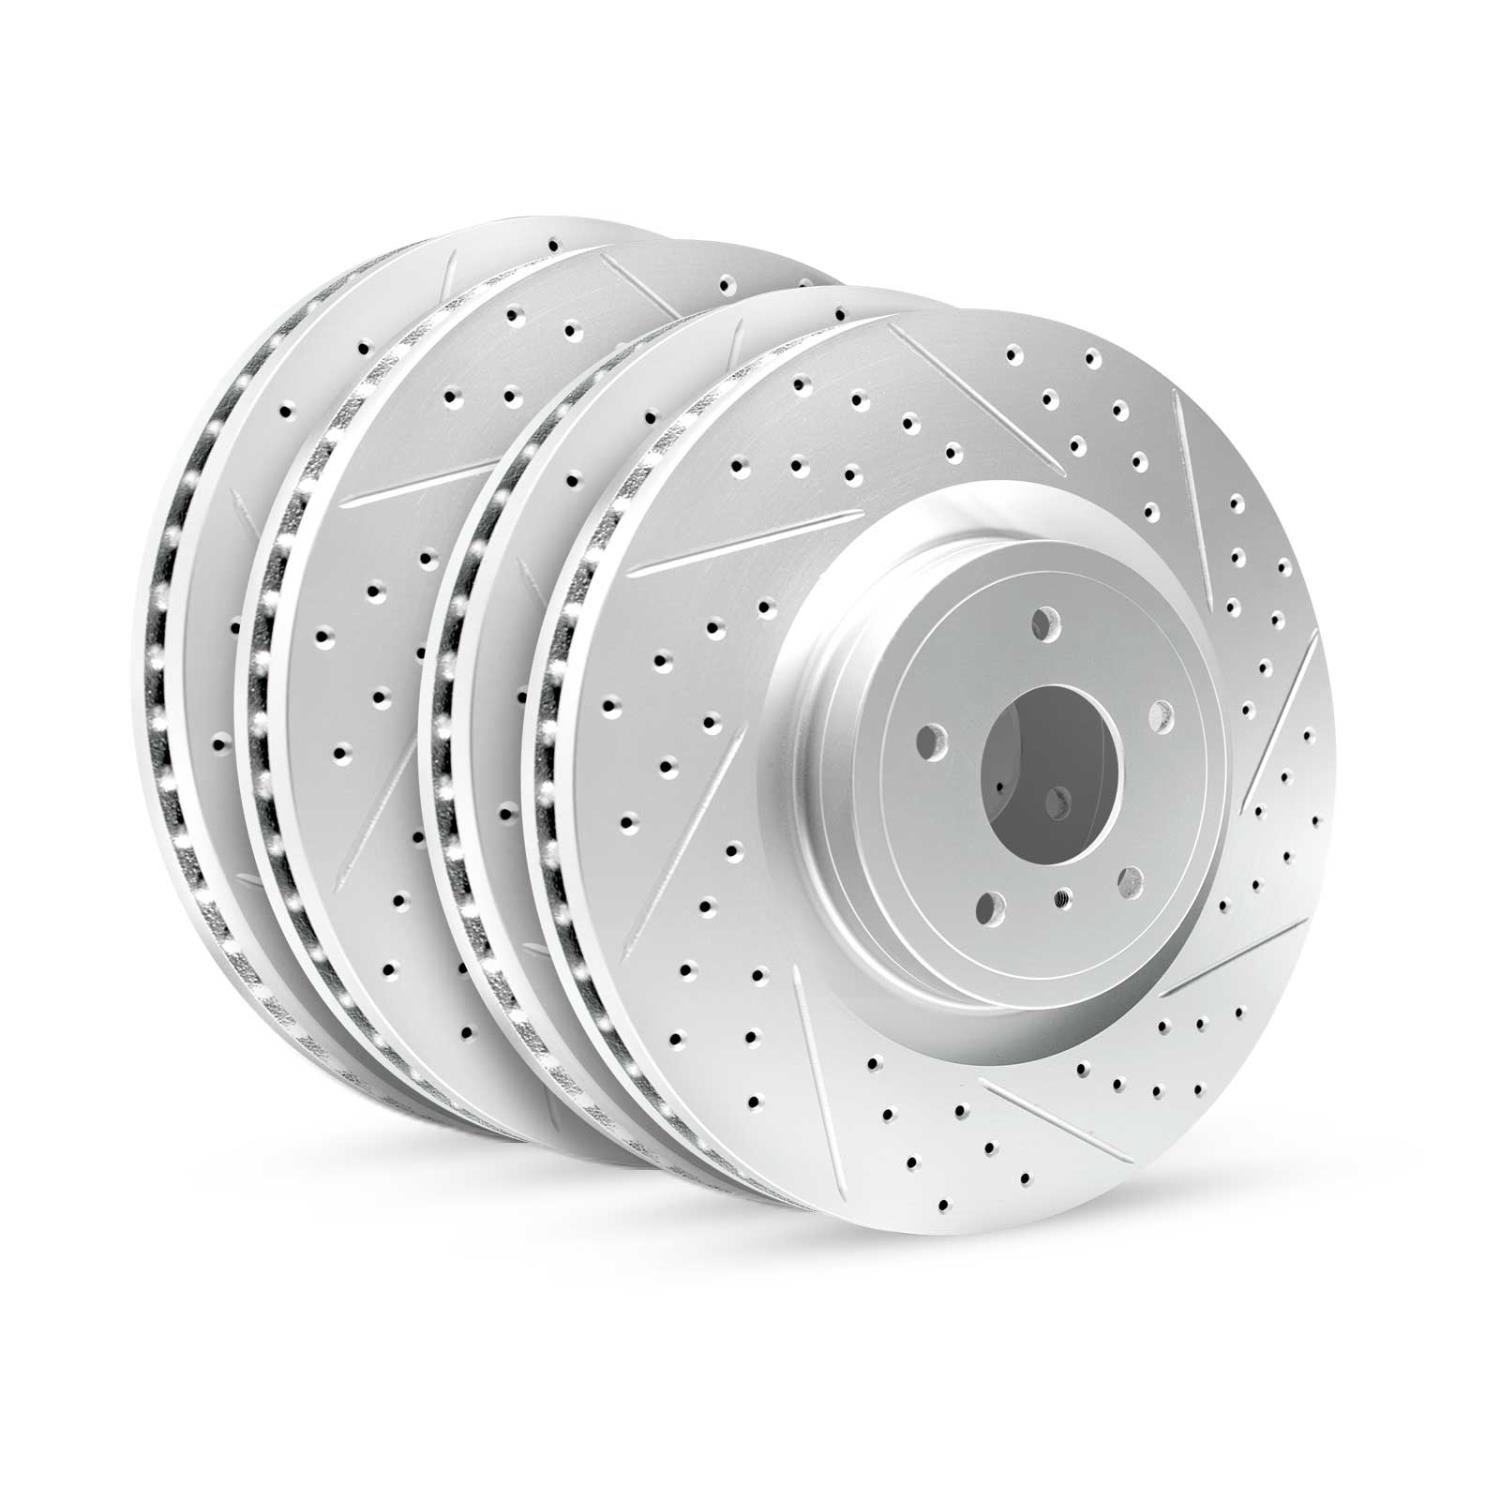 GEO-Carbon Drilled/Slotted Rotors, 2015-2020 Ford/Mazda,